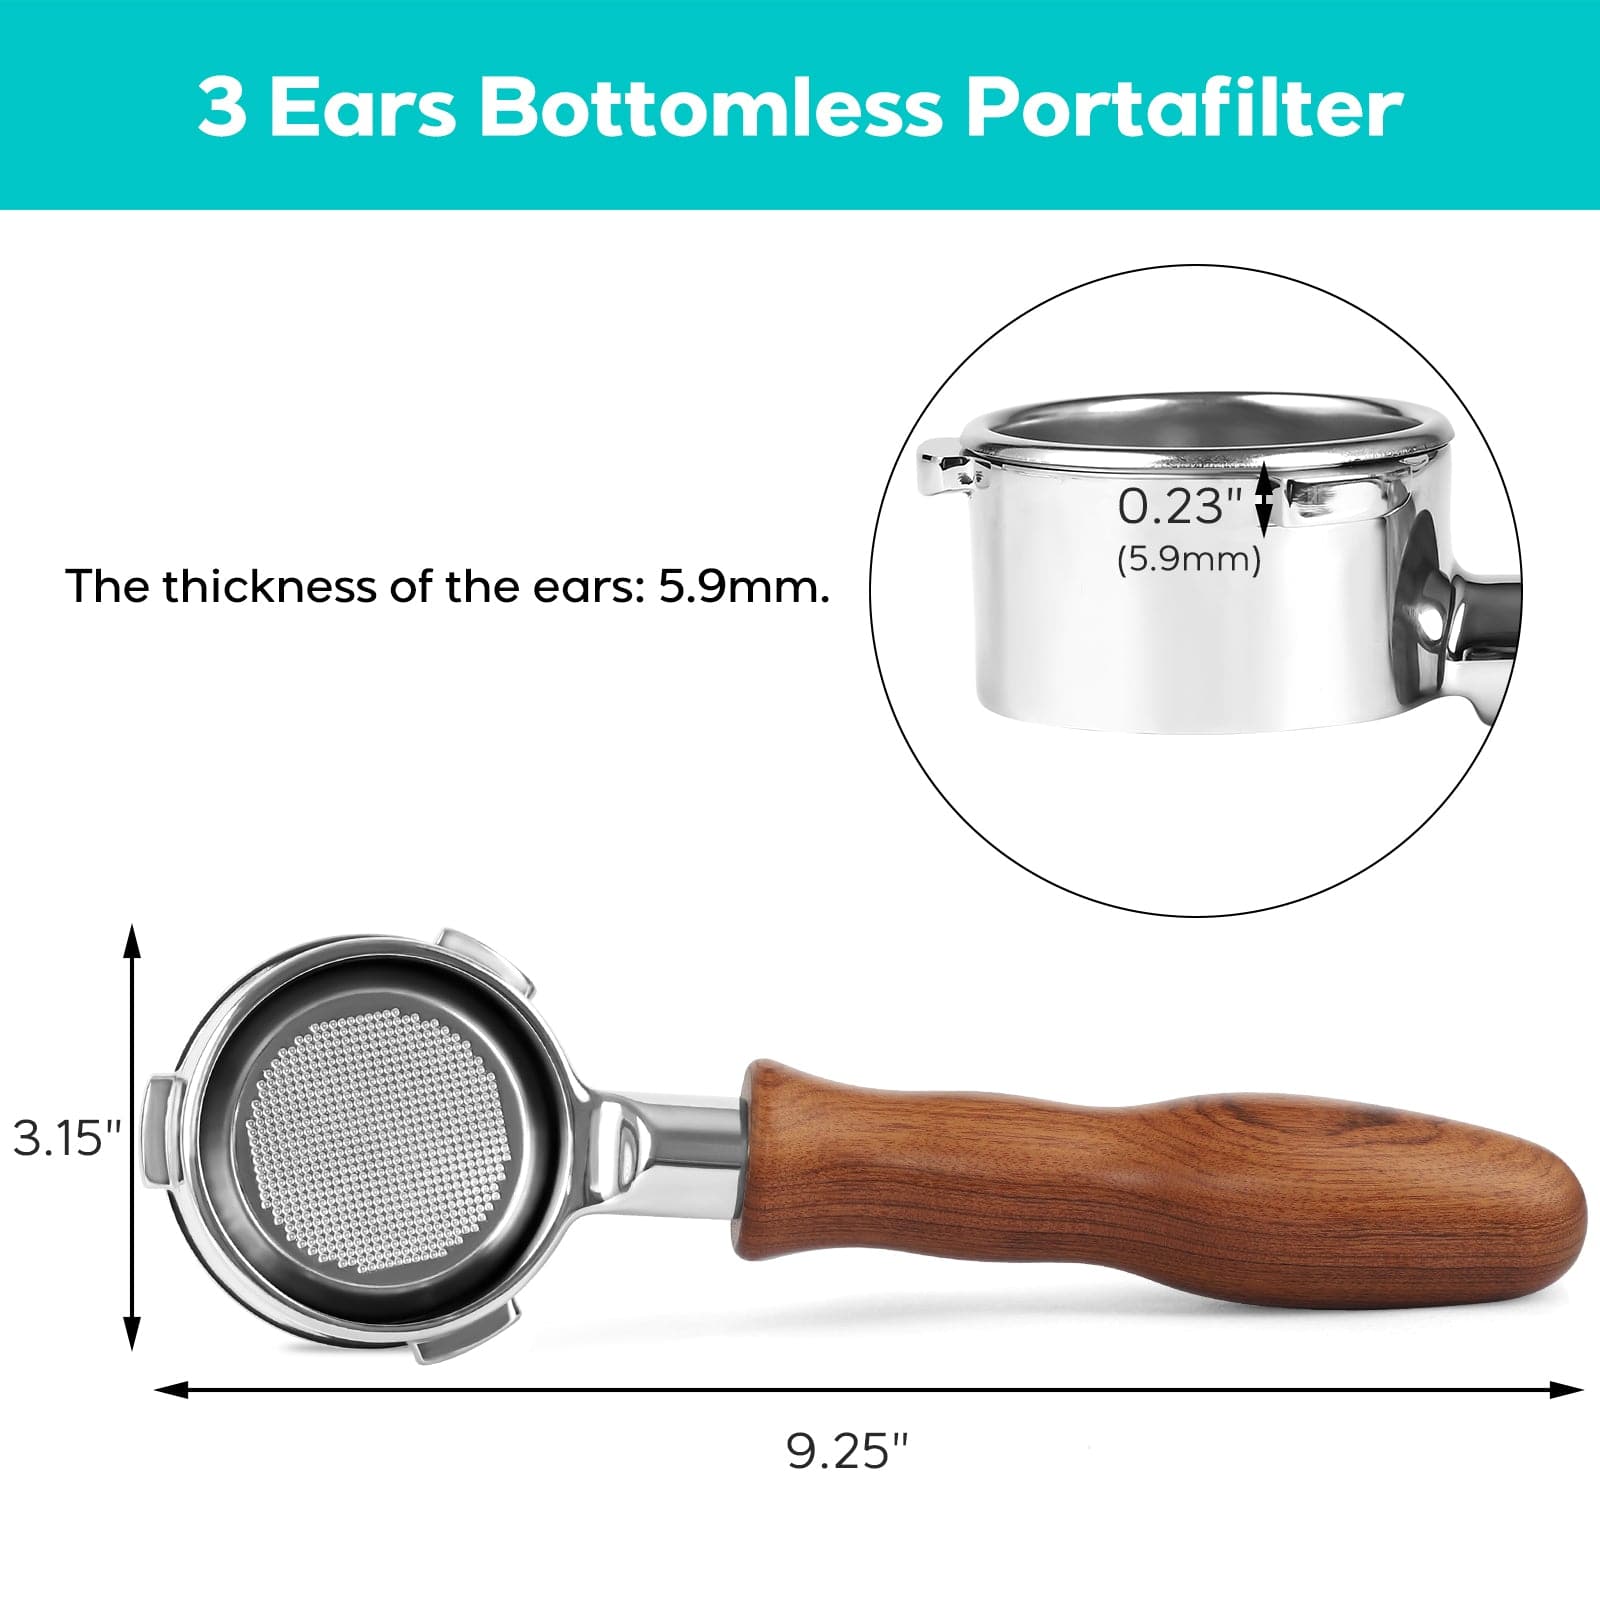 58mm Bottomless Stainless-steel Portafilter with 3 Ears Compatible with 5700 Series